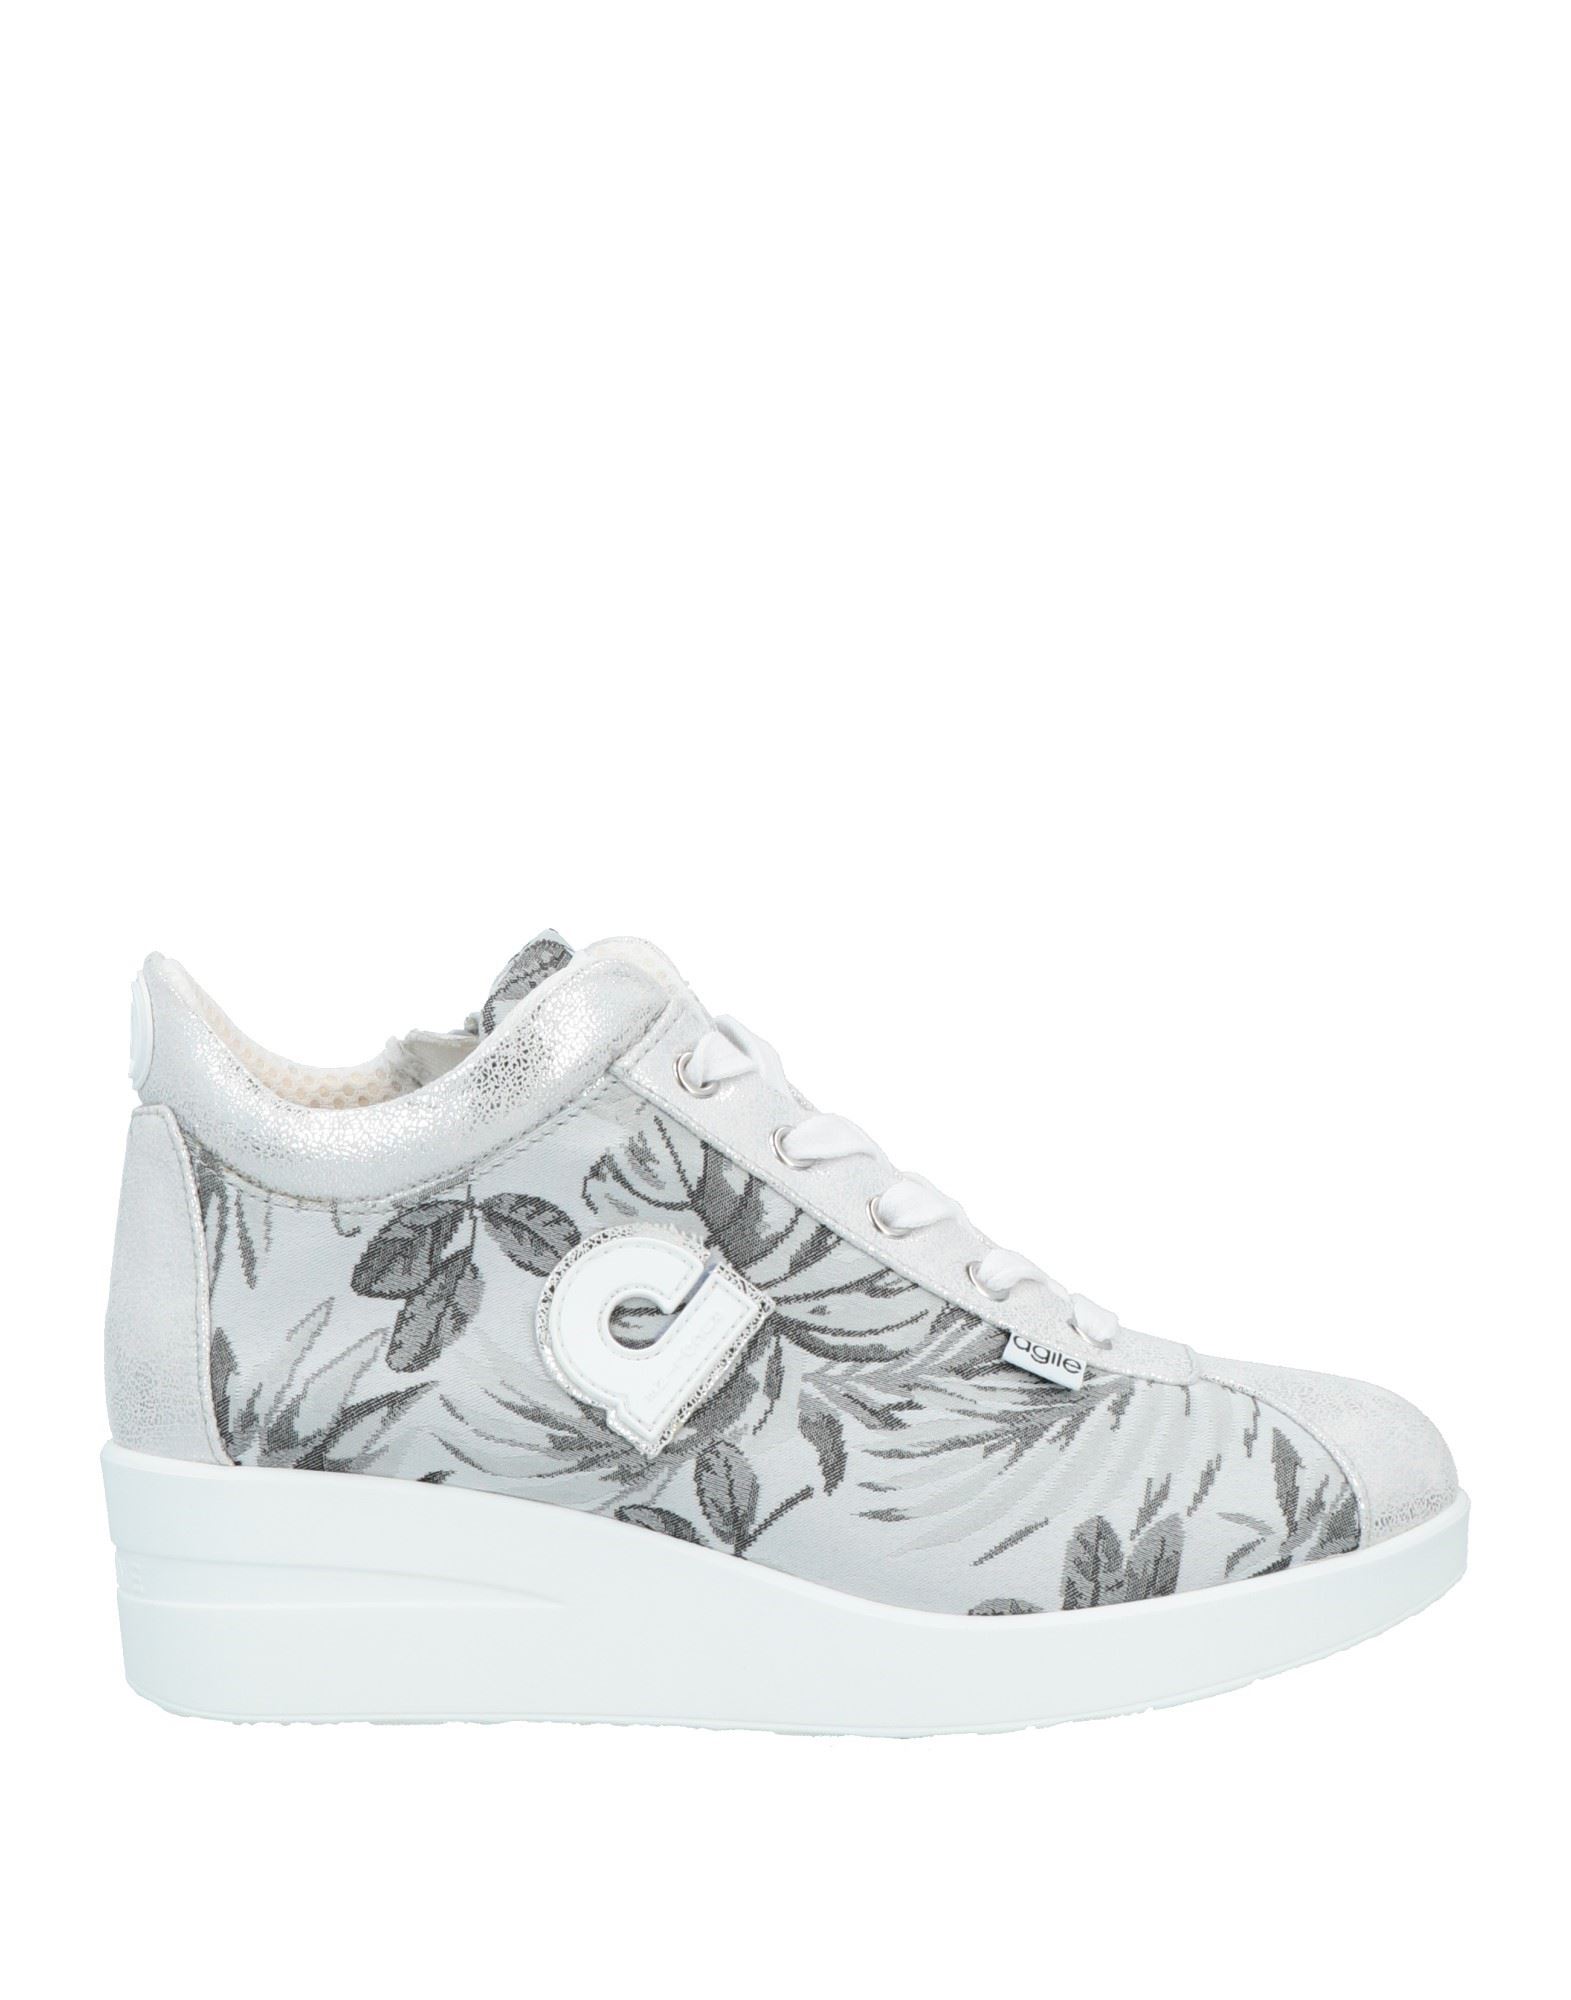 Agile By Rucoline Sneakers In Light Grey